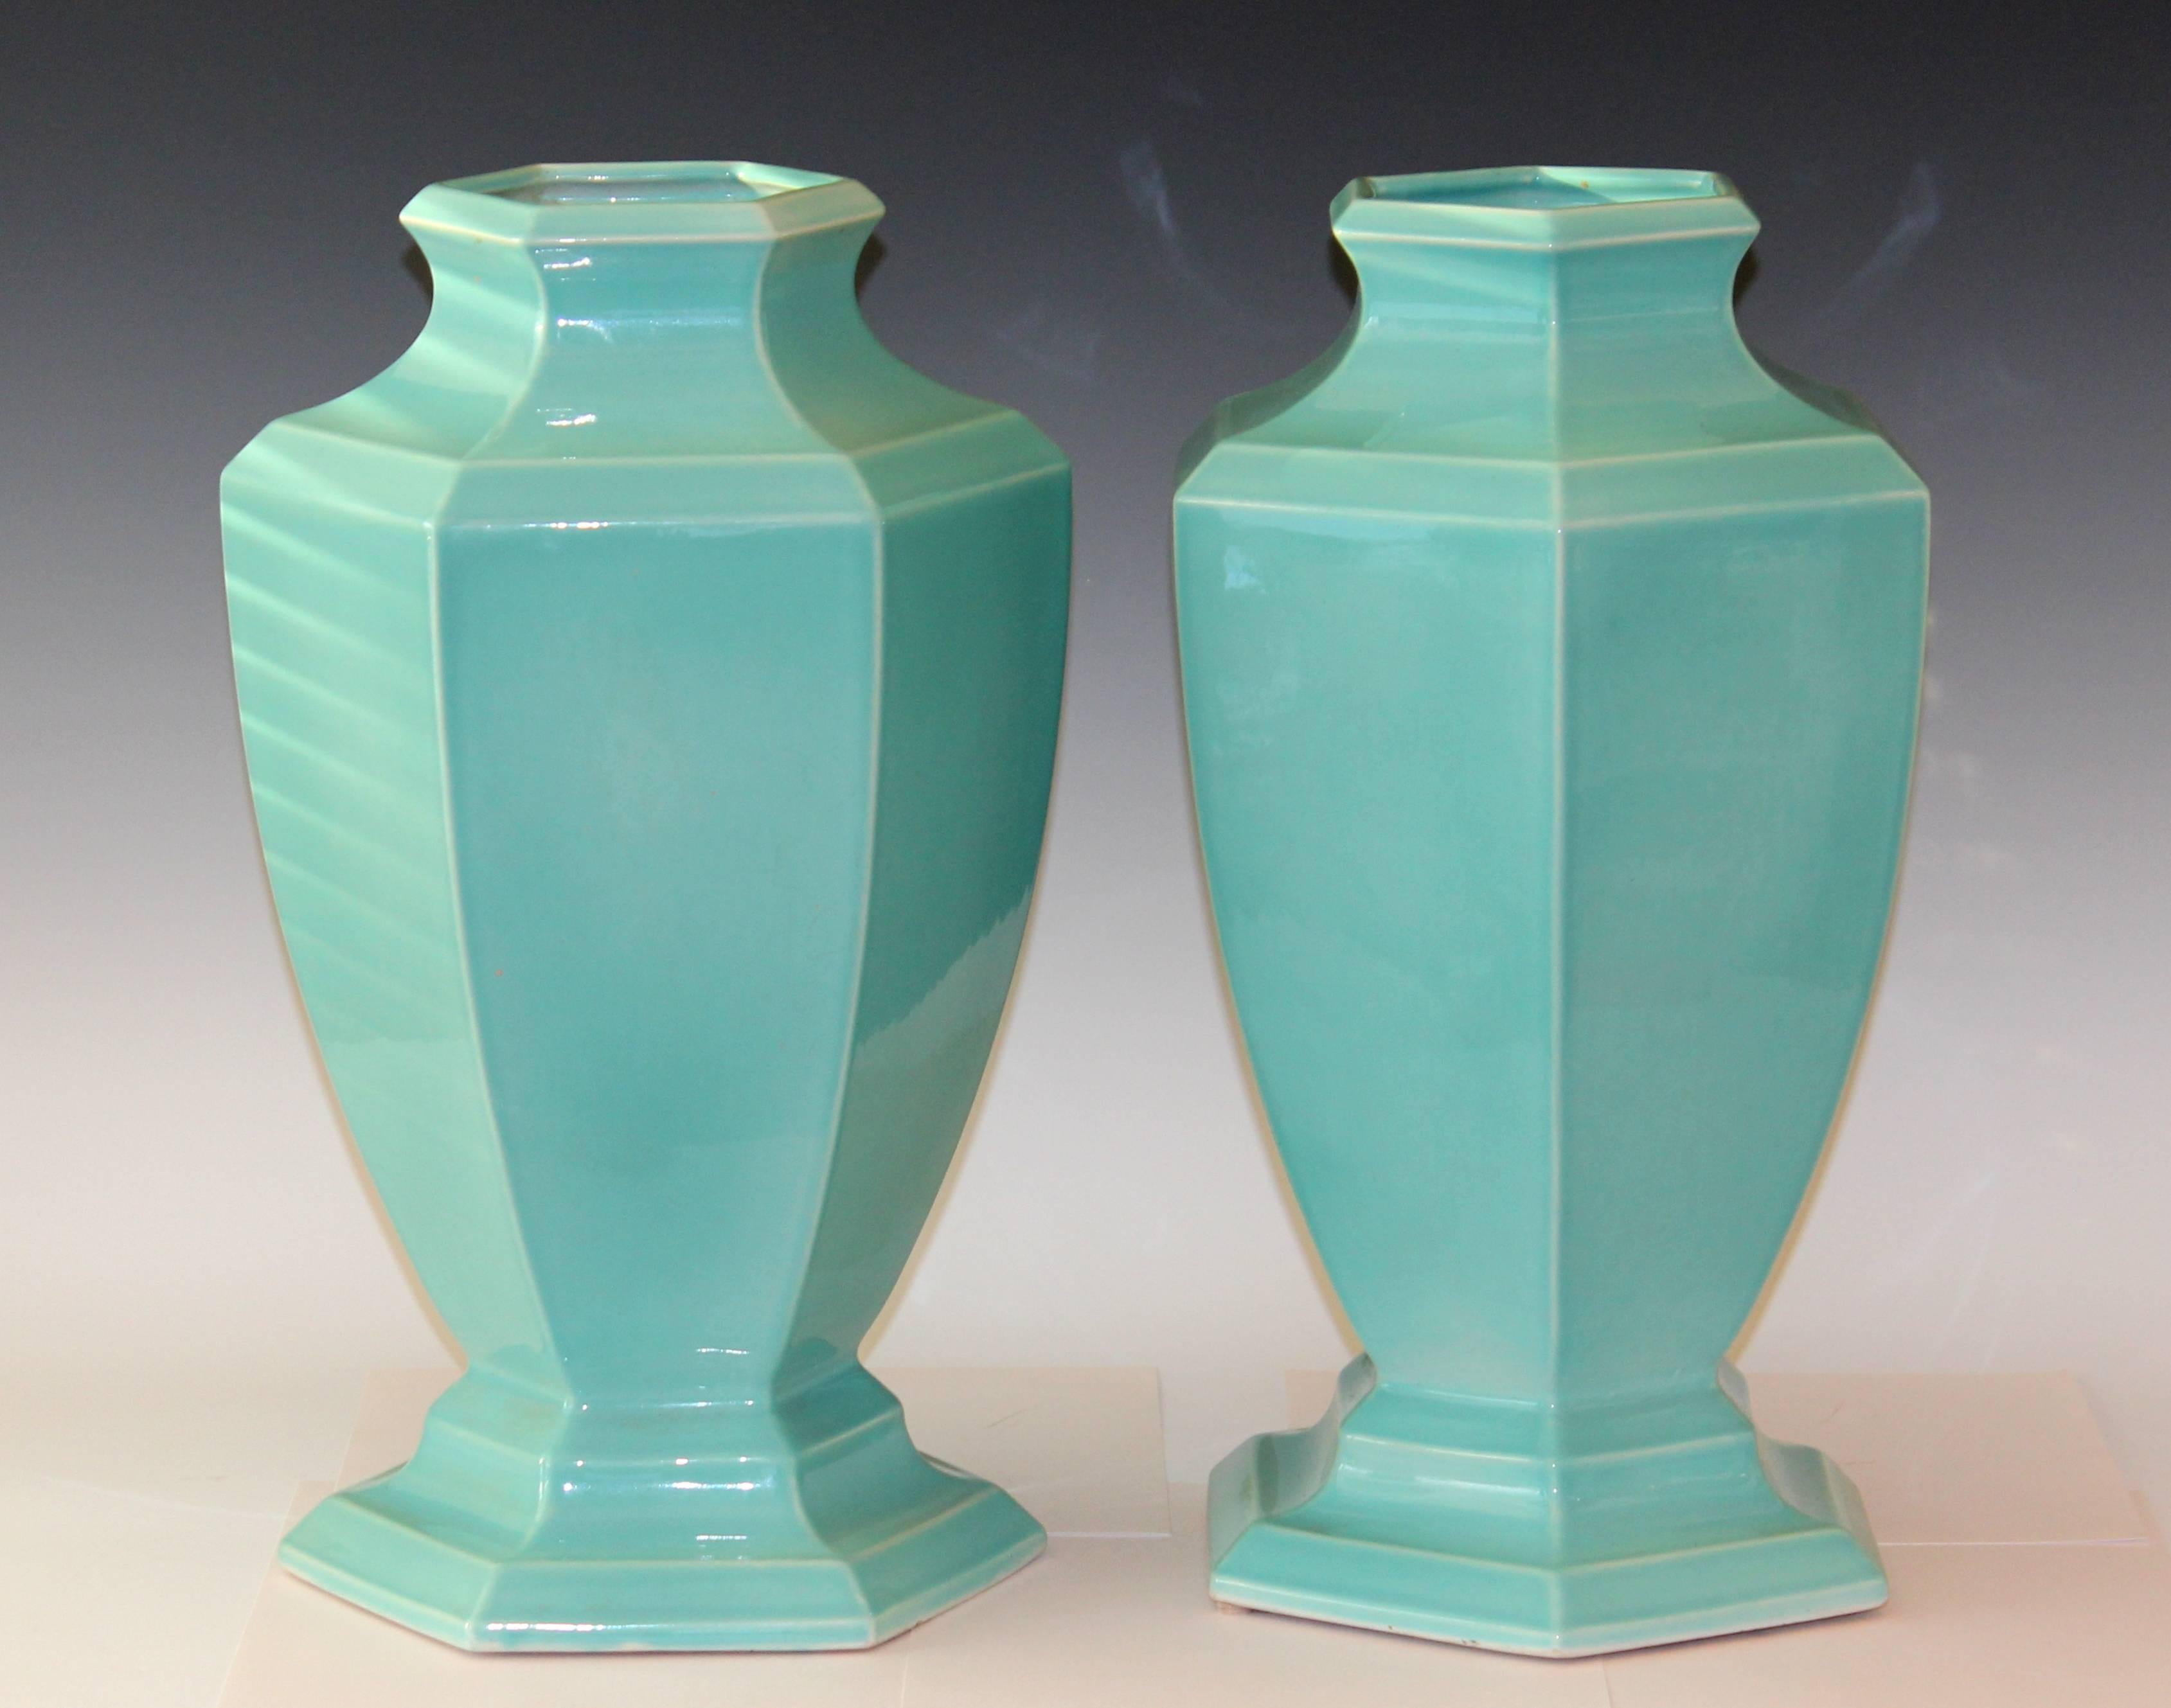 Large pair of Art Deco period hexagonal urns from the Trenton Potteries Company in great aqua turquoise glaze, circa 1930s. Marked on bases. Measures: 18